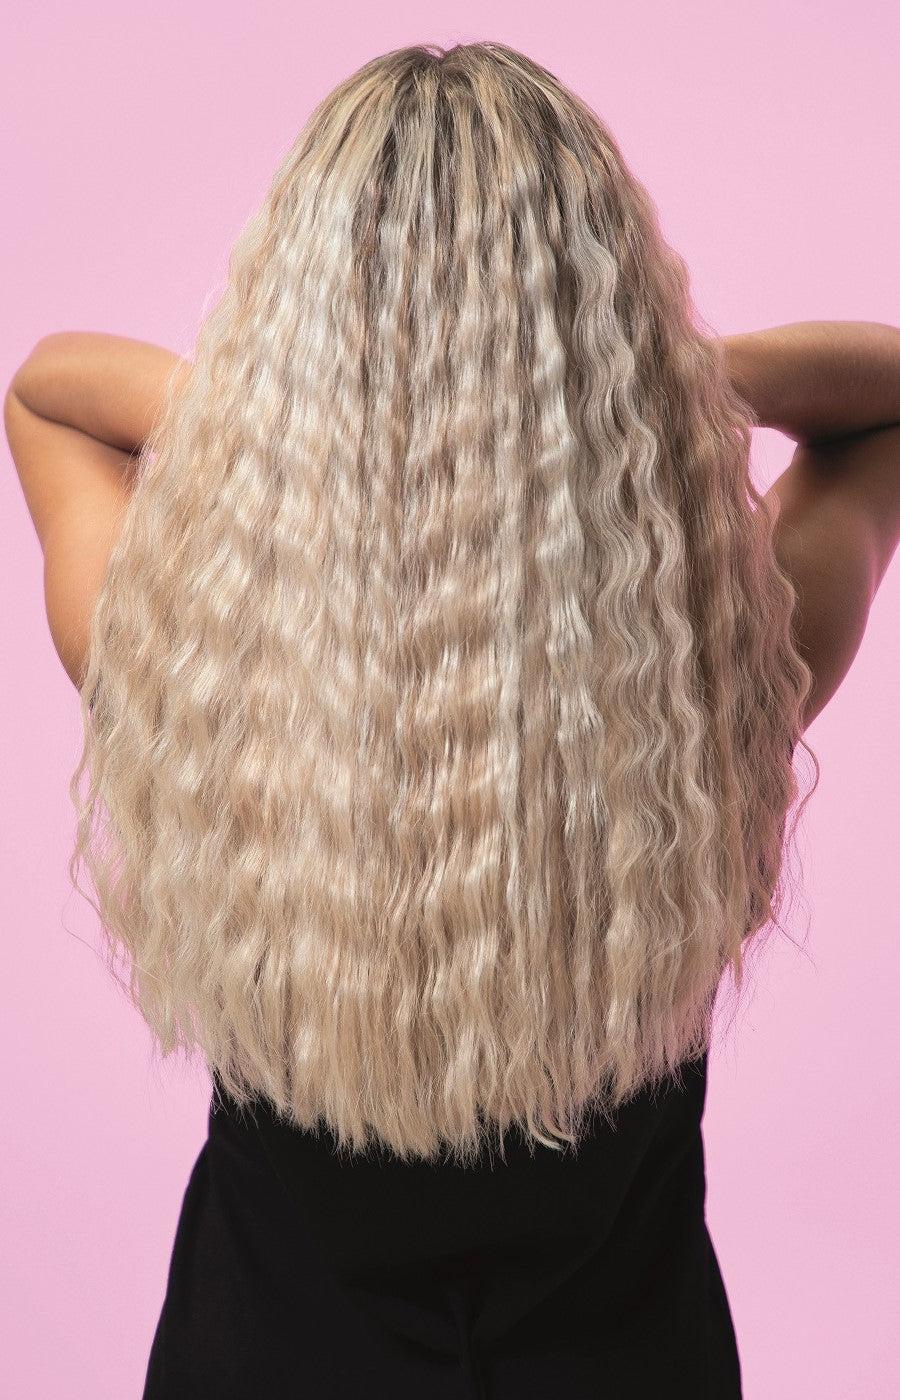 Back view of woman with tighter beach wavy hair